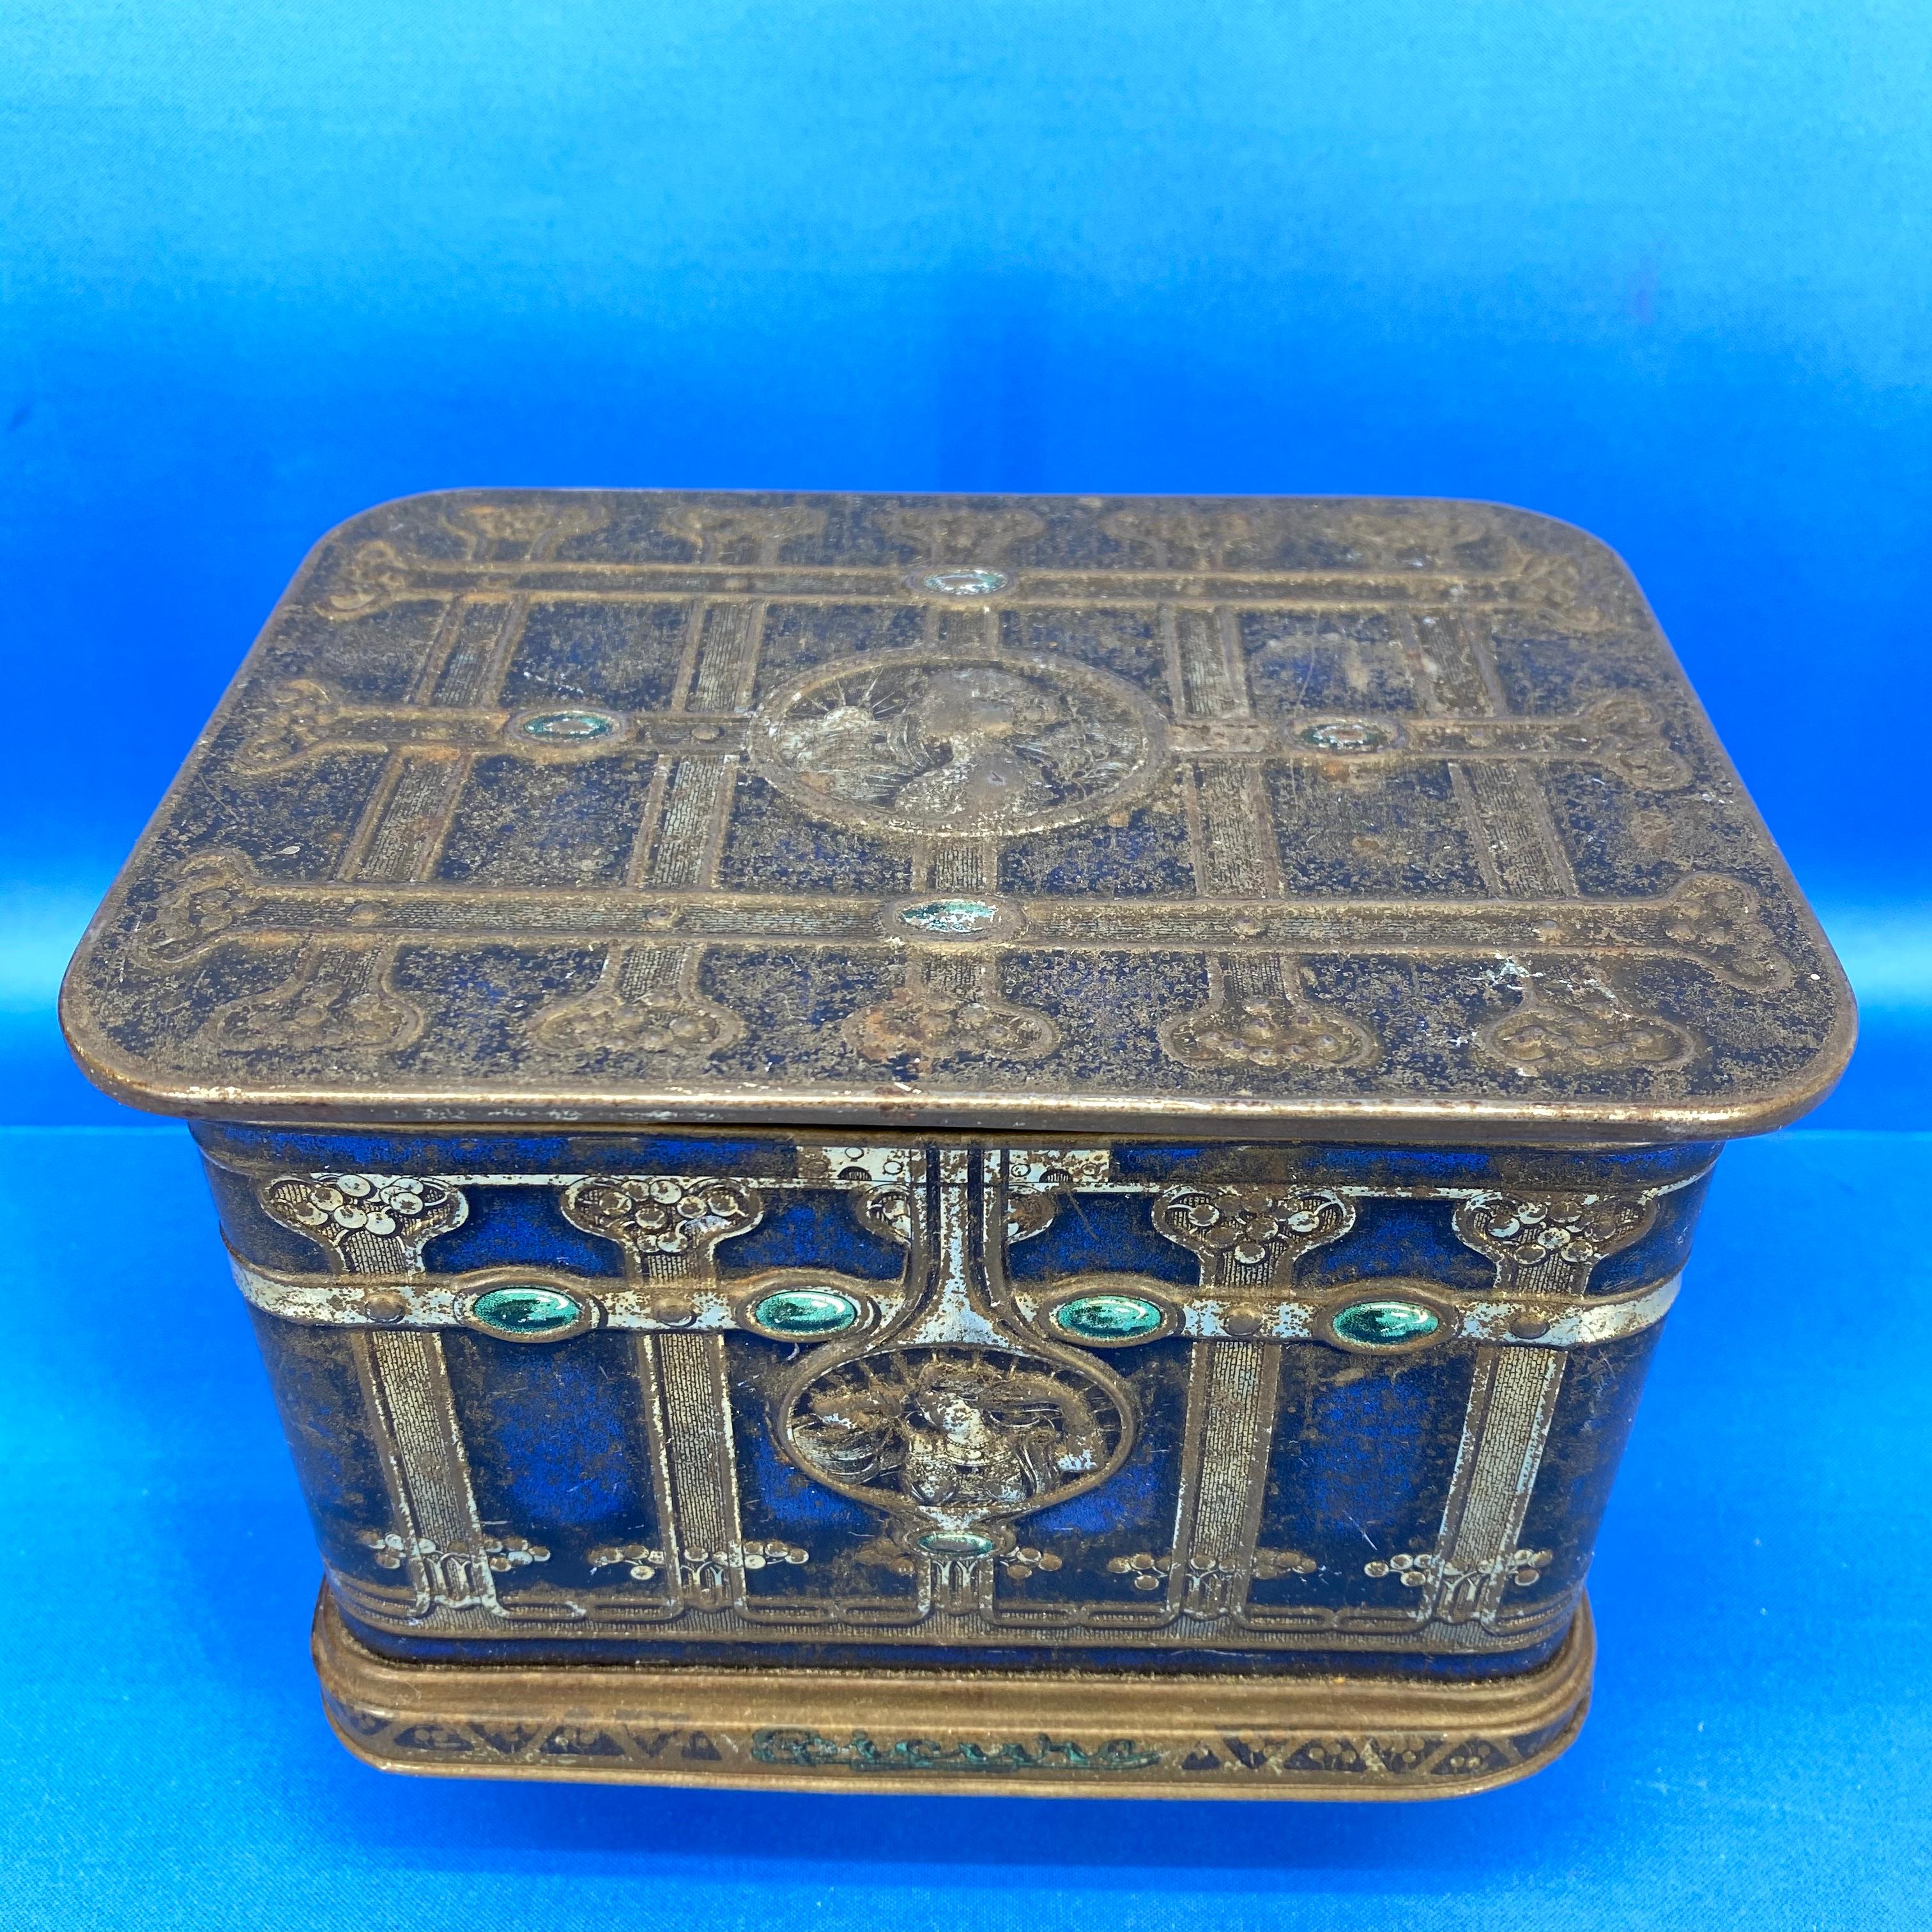 Pressed Early Blue American Toleware Tobacco Or Jewelry Box